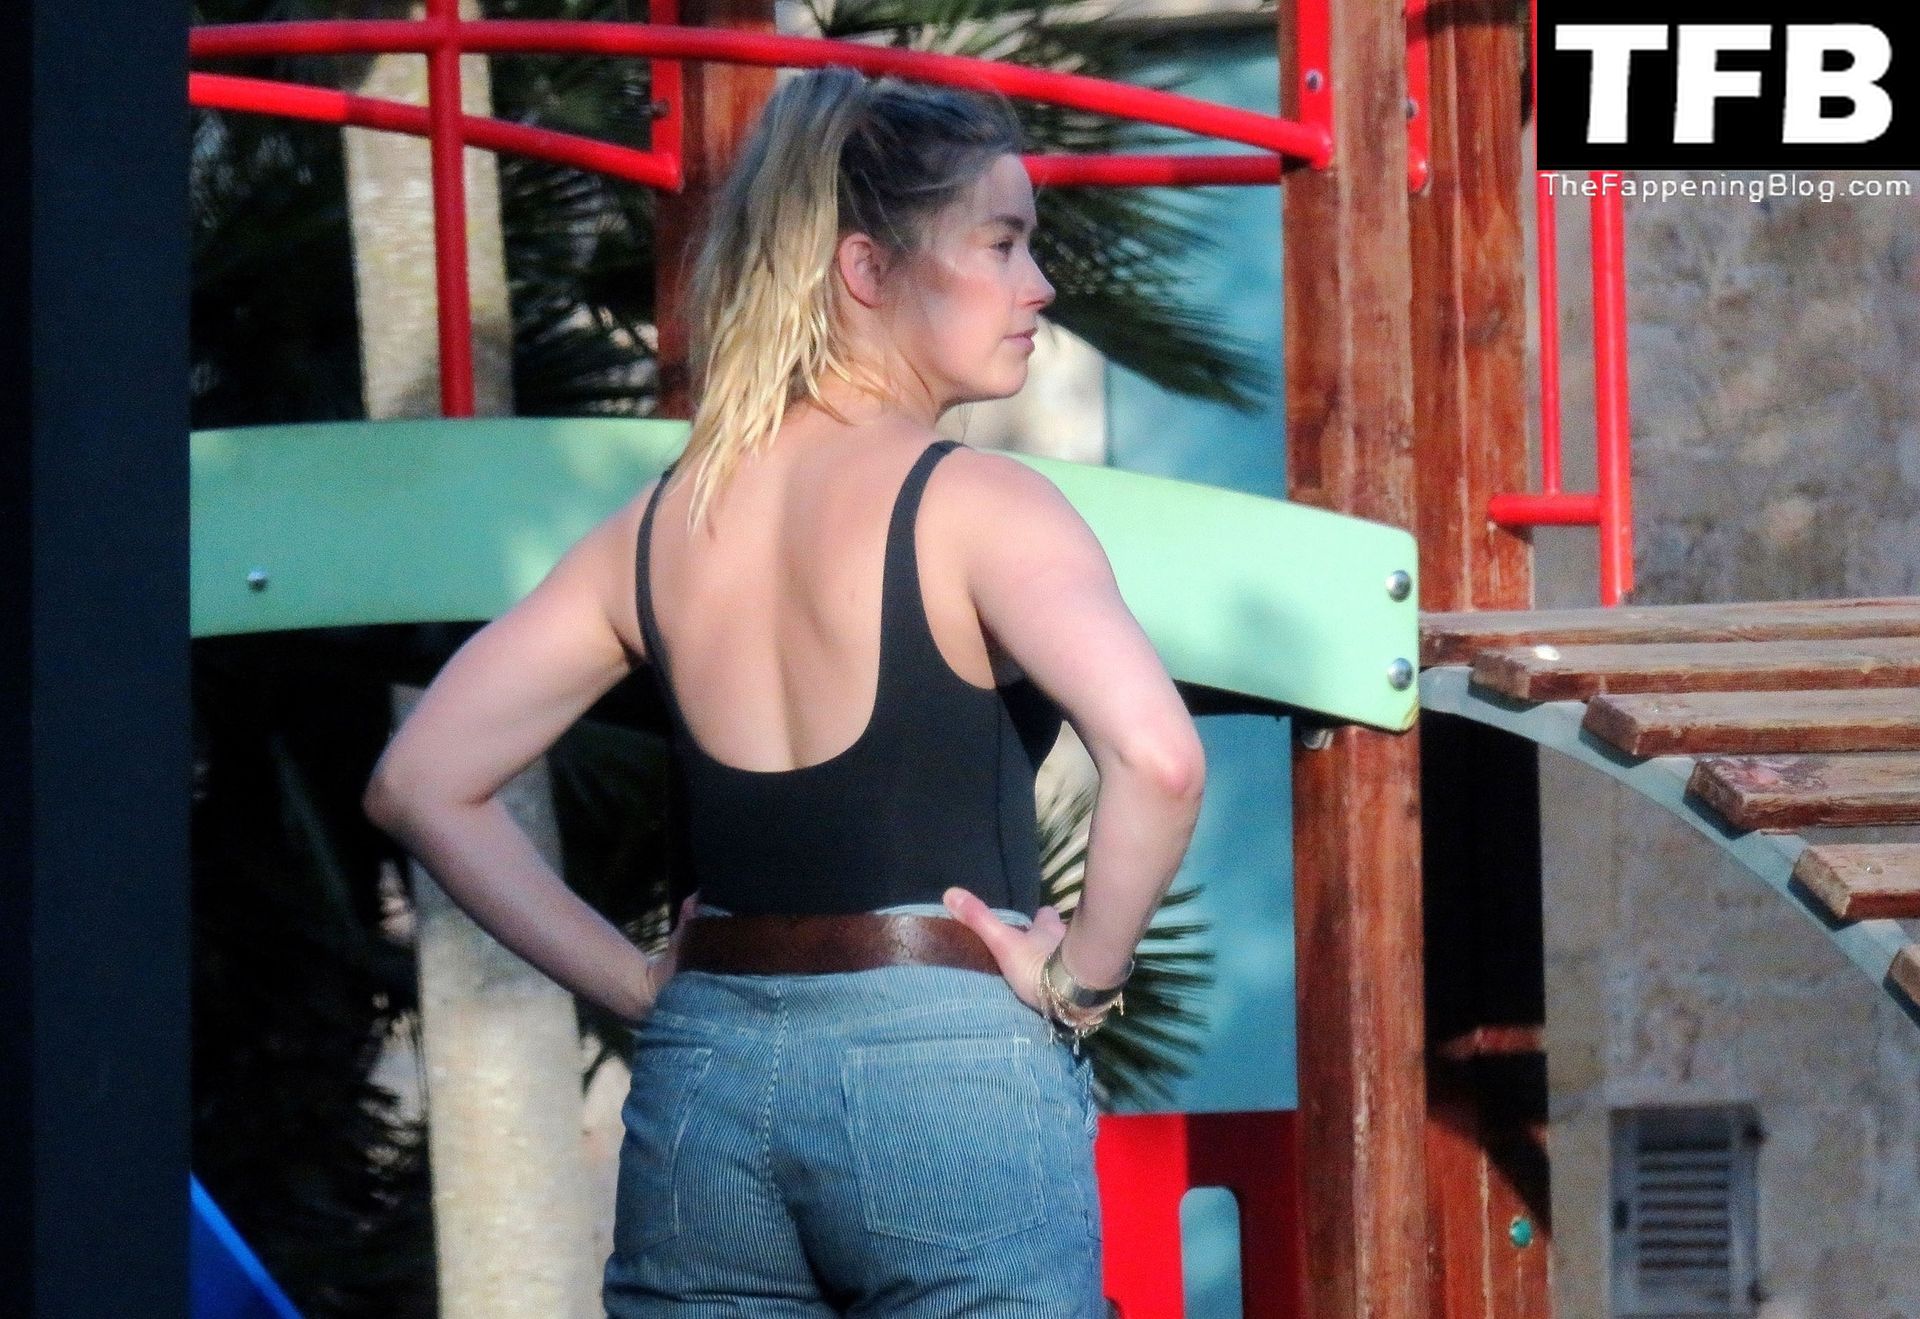 Amber Heard Sexy The Fappening Blog 15 - Amber Heard Continues to Get Away From It All During her Spanish Vacation in Palma De Mallorca (26 Photos)